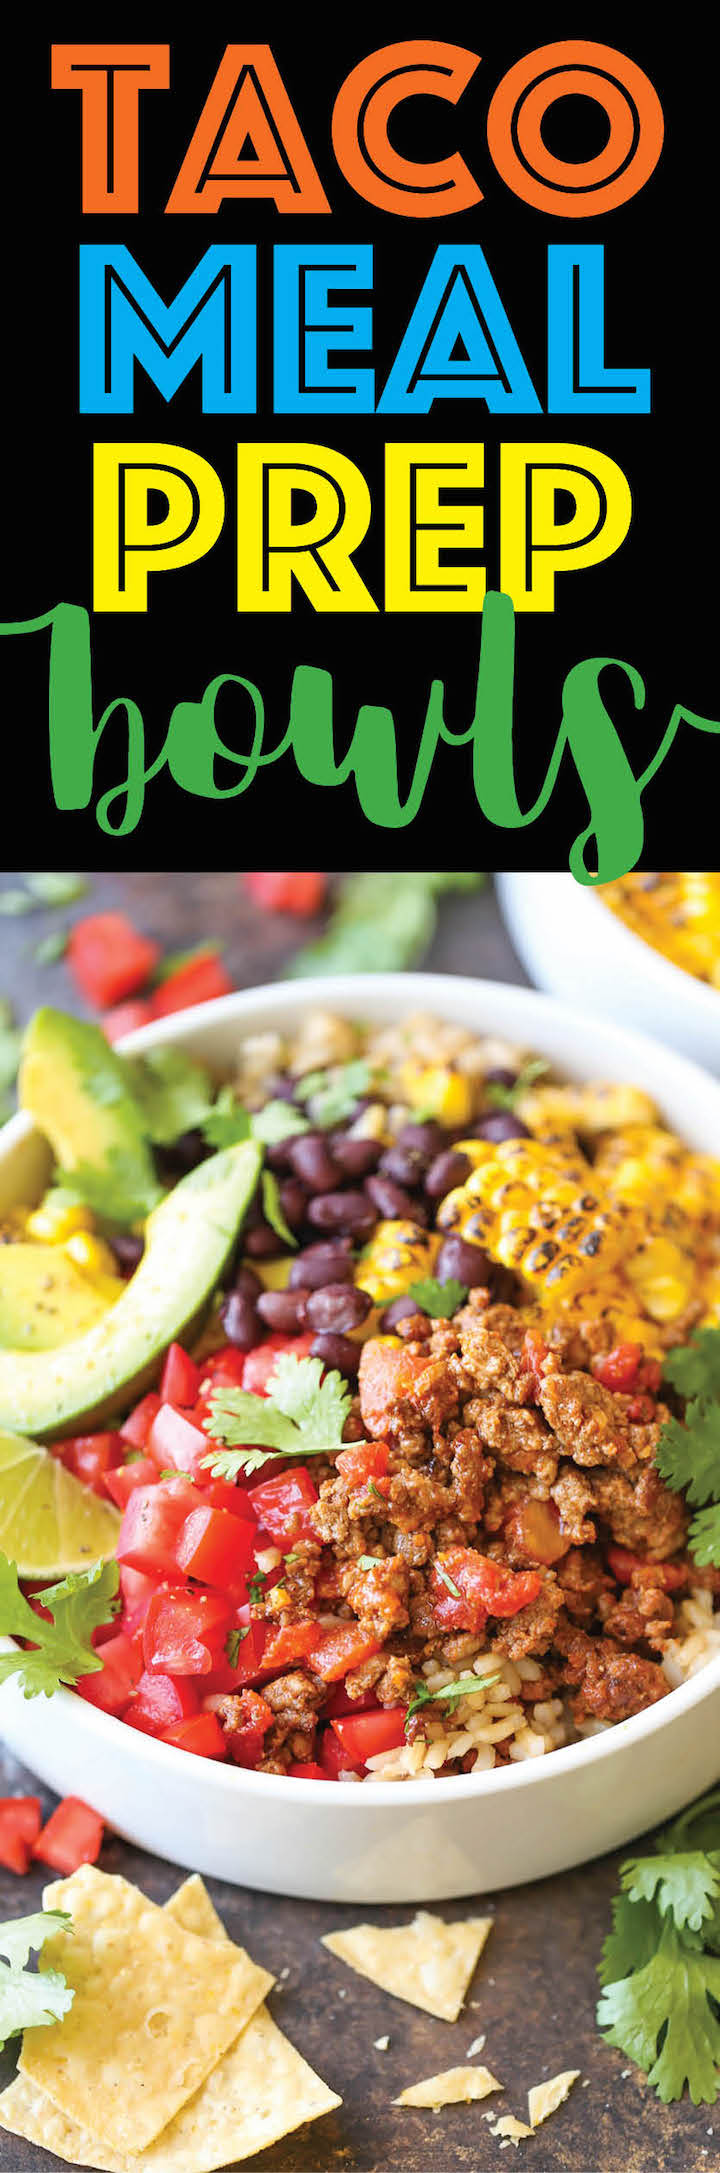 Taco Meal Prep Bowls - Meal prep for the entire week with these healthy Mexican bowls. This saves you money, time, calories - you honestly can't beat that!